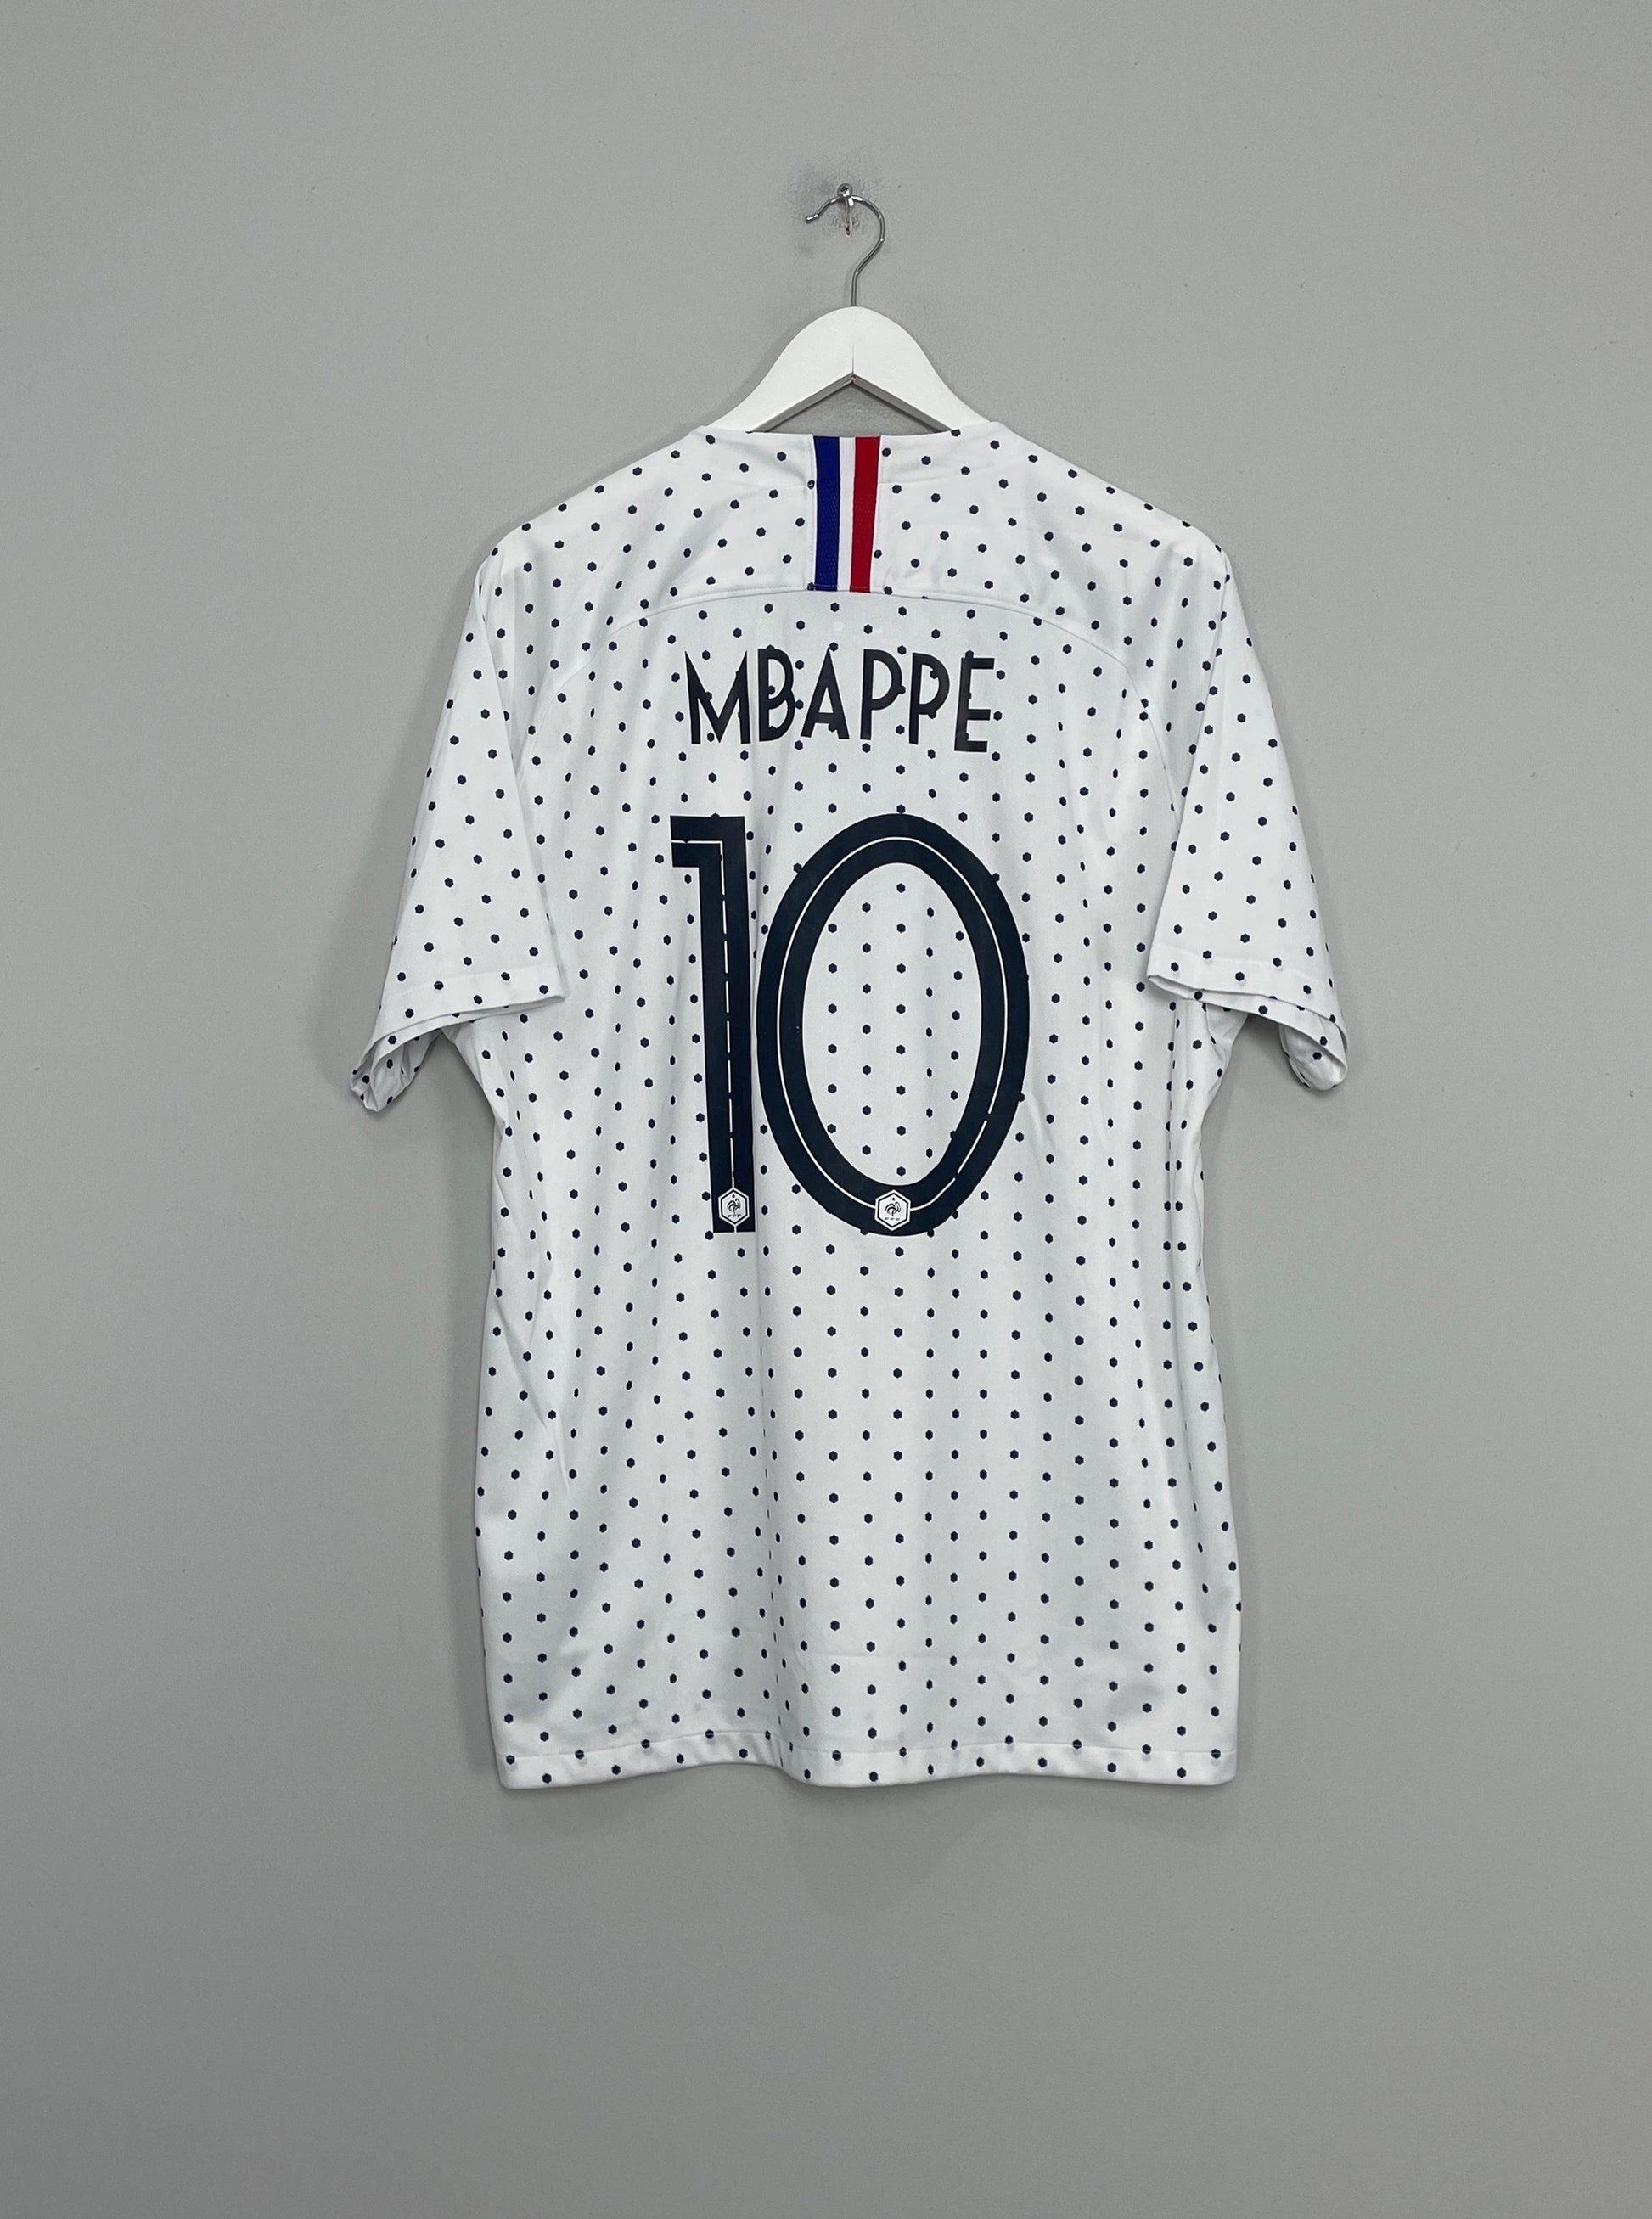 Image of the France Mbappe shirt from the 2019/20 season